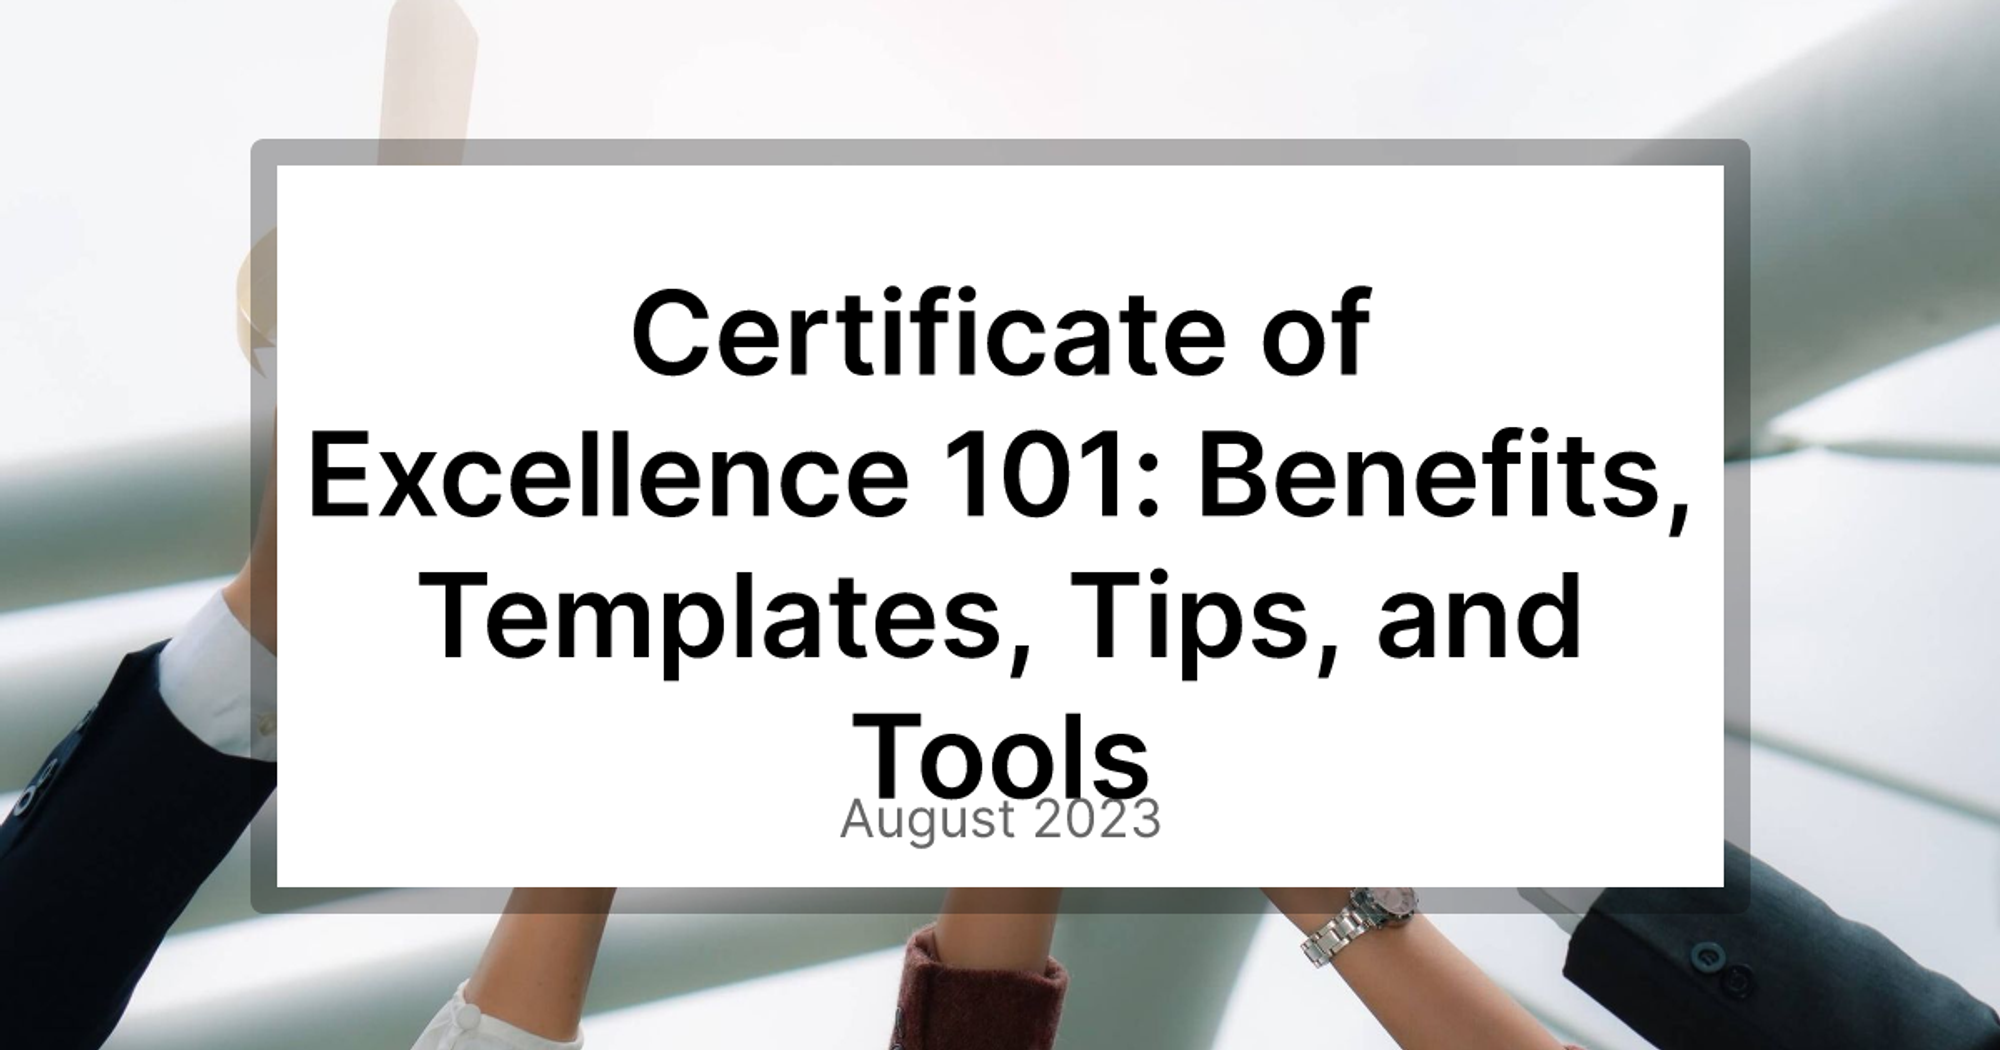 Certificate of Excellence 101: Benefits, Templates, Tips, and Tools